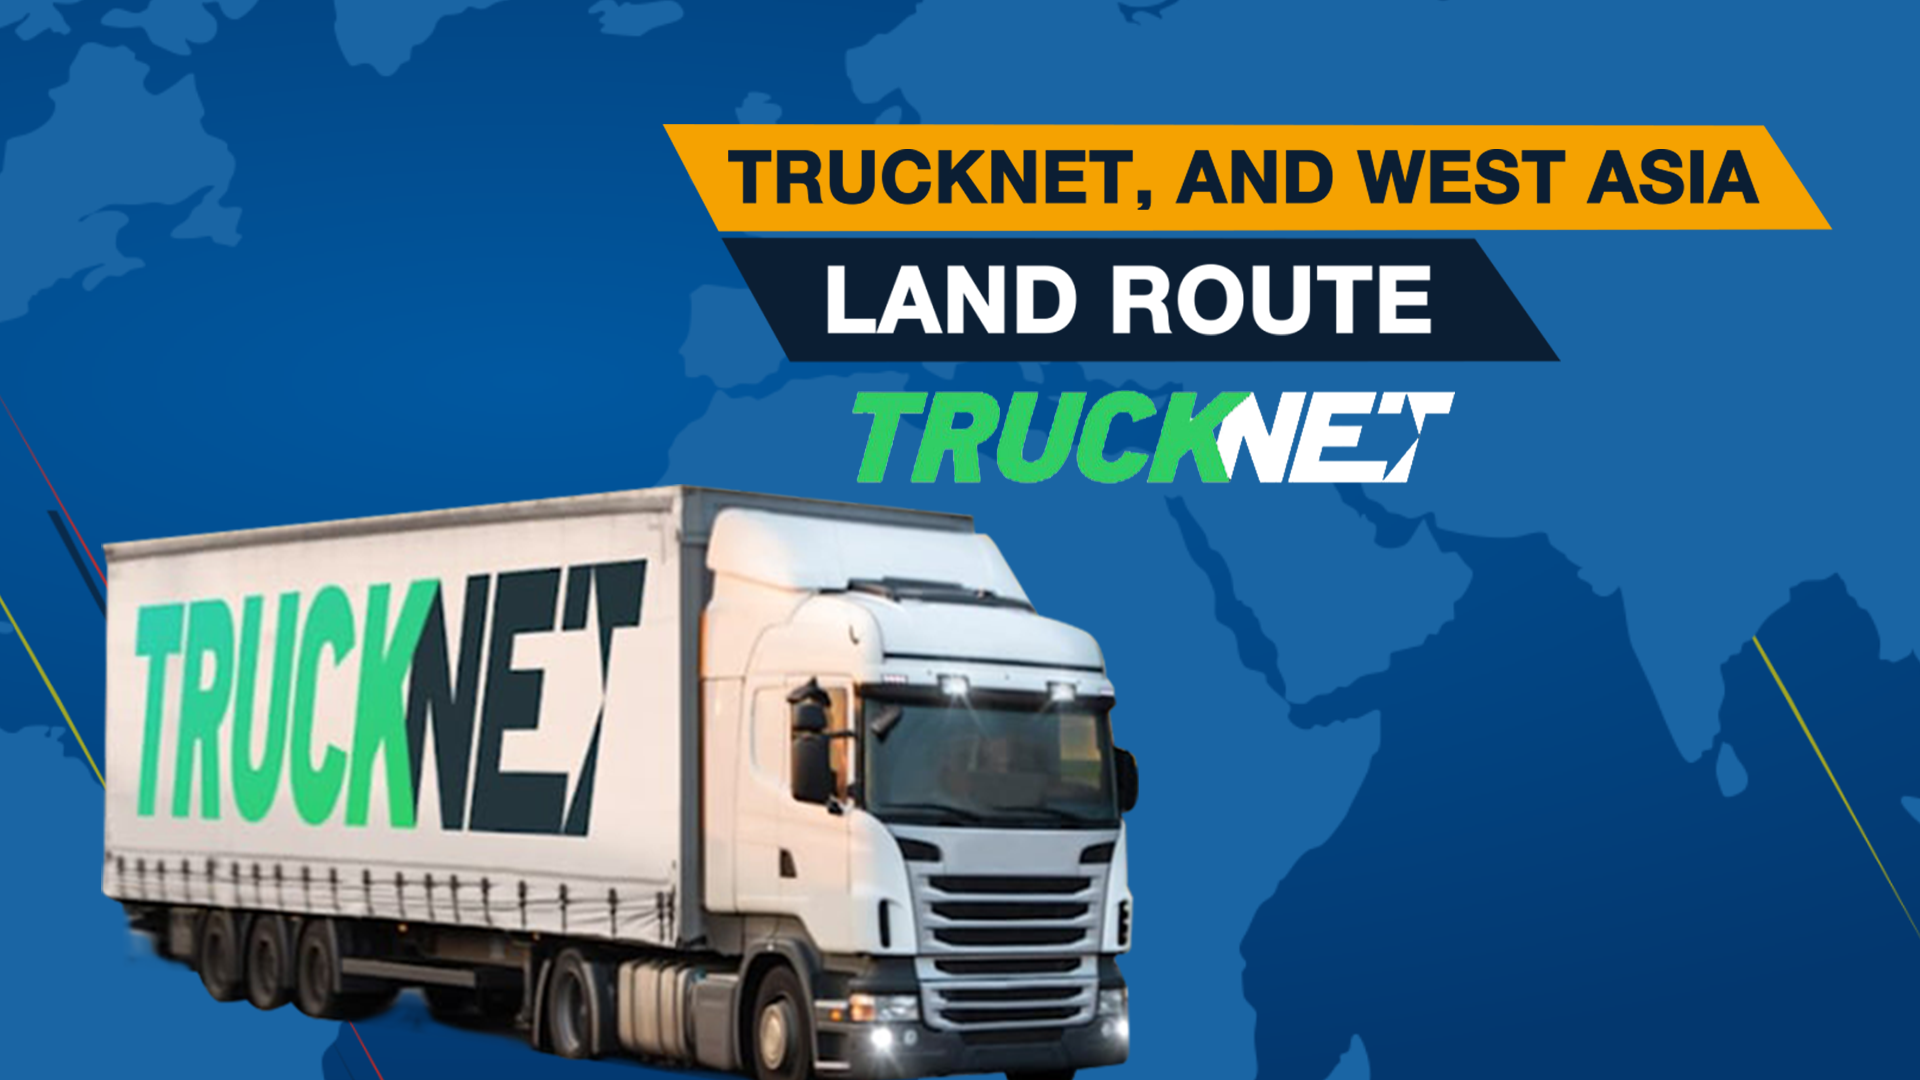 The case of Trucknet, land route through West Asia